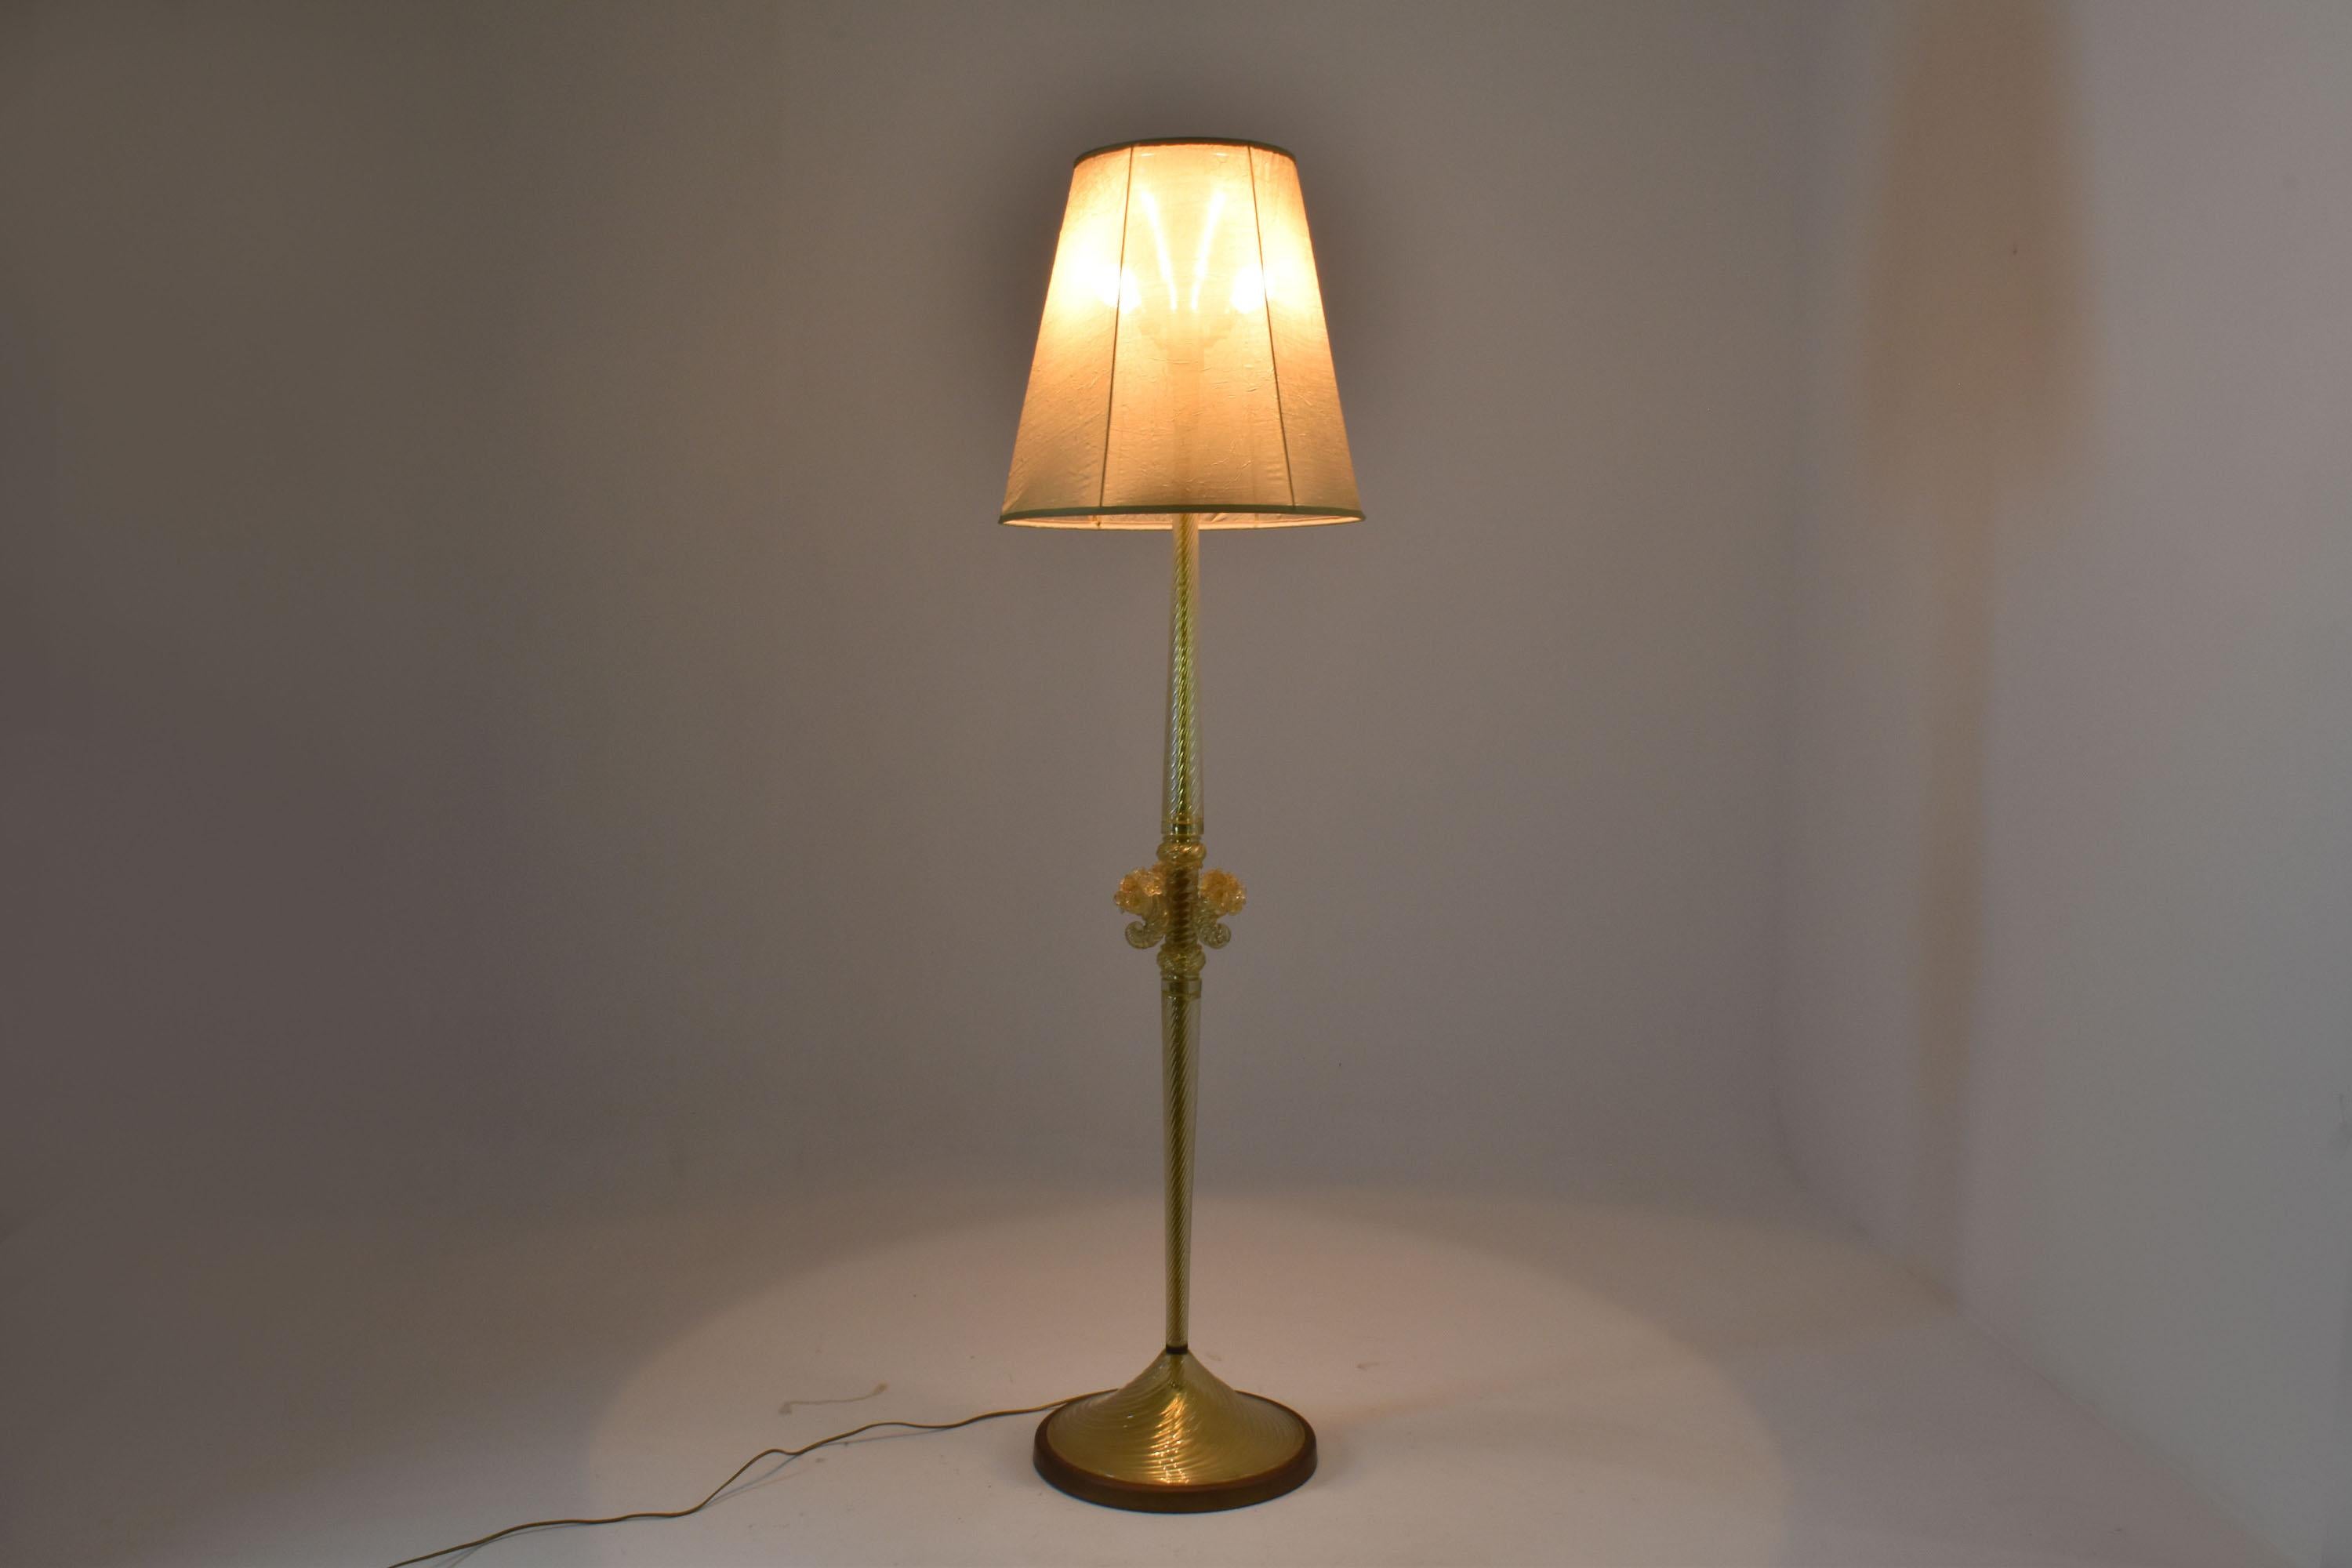 20th Century Italian Gold Murano Floor Lamp by Barovier Ercole, 1950s For Sale